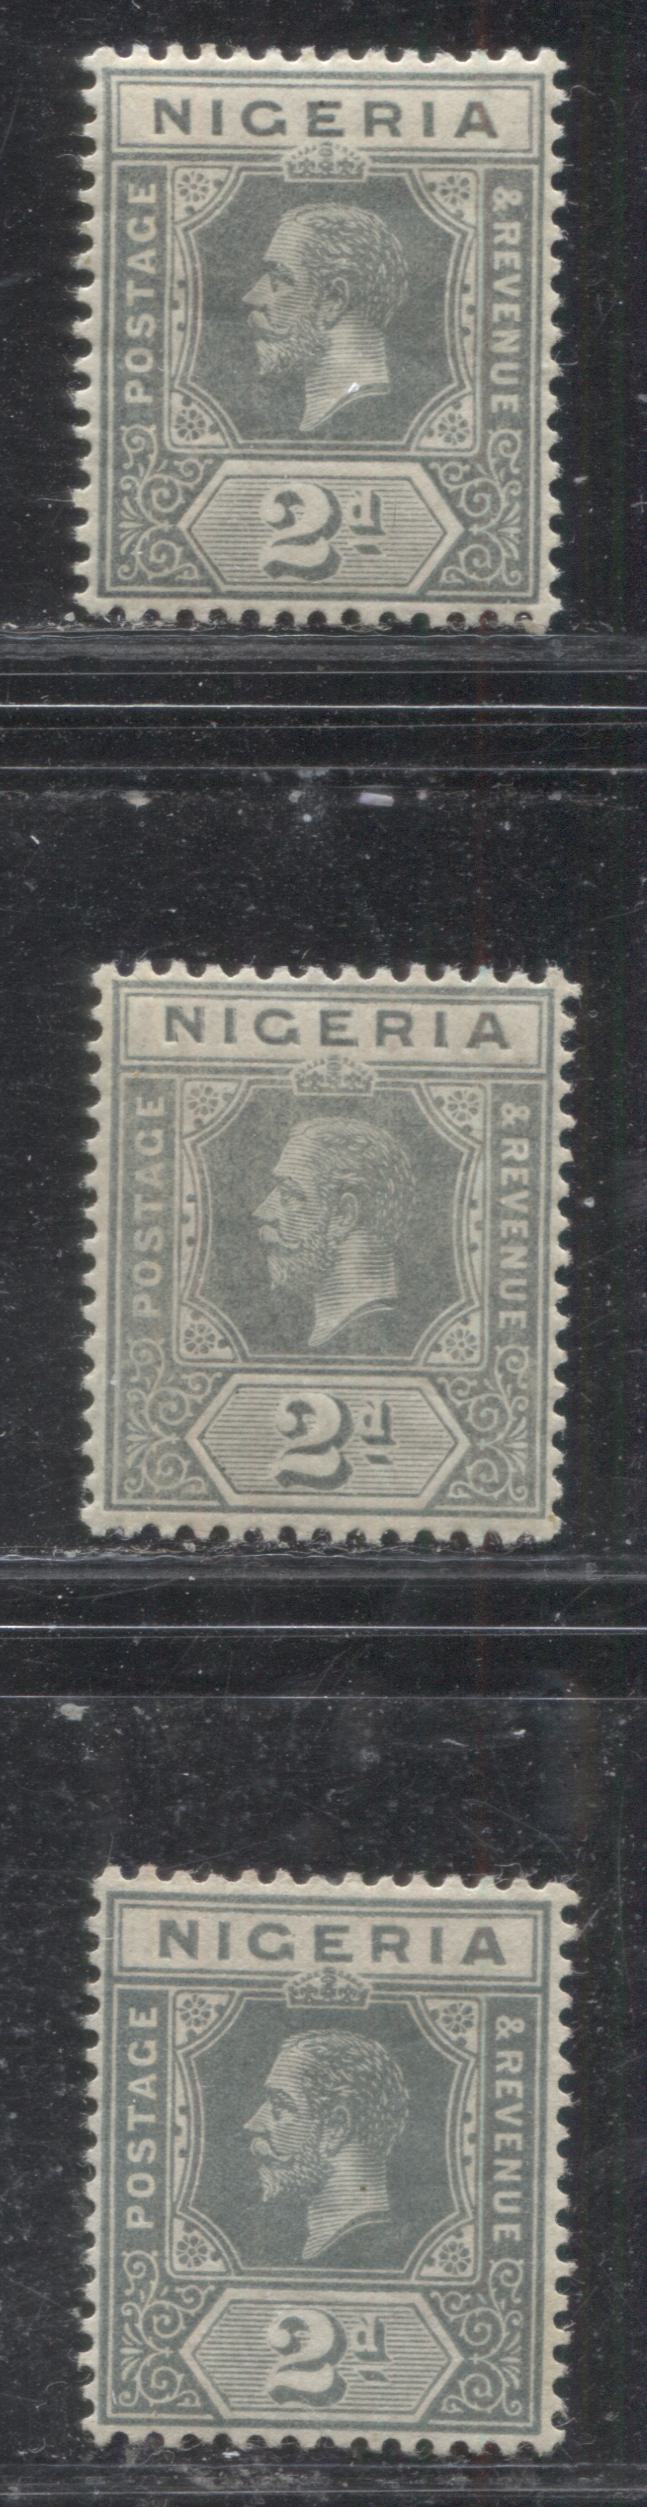 Lot 178 Nigeria SG# 3 2d Grey King George V, 1914-1921 Multiple Crown CA Imperium Keyplate Issue, Three VFOG Examples, From Different Printings, Each a Slightly Different Shade